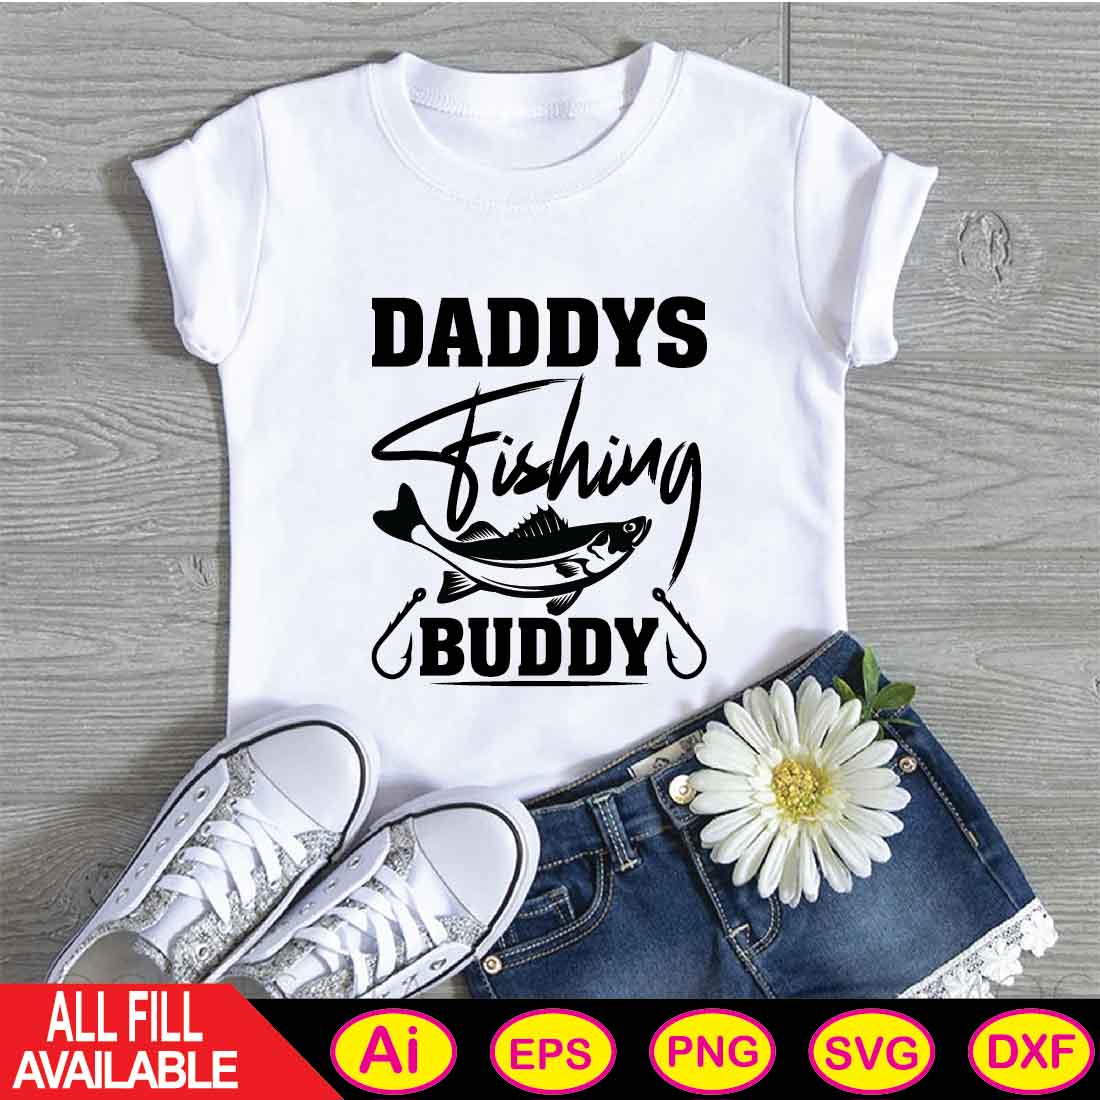 daddys fishing buddy t-shirt design cover image.